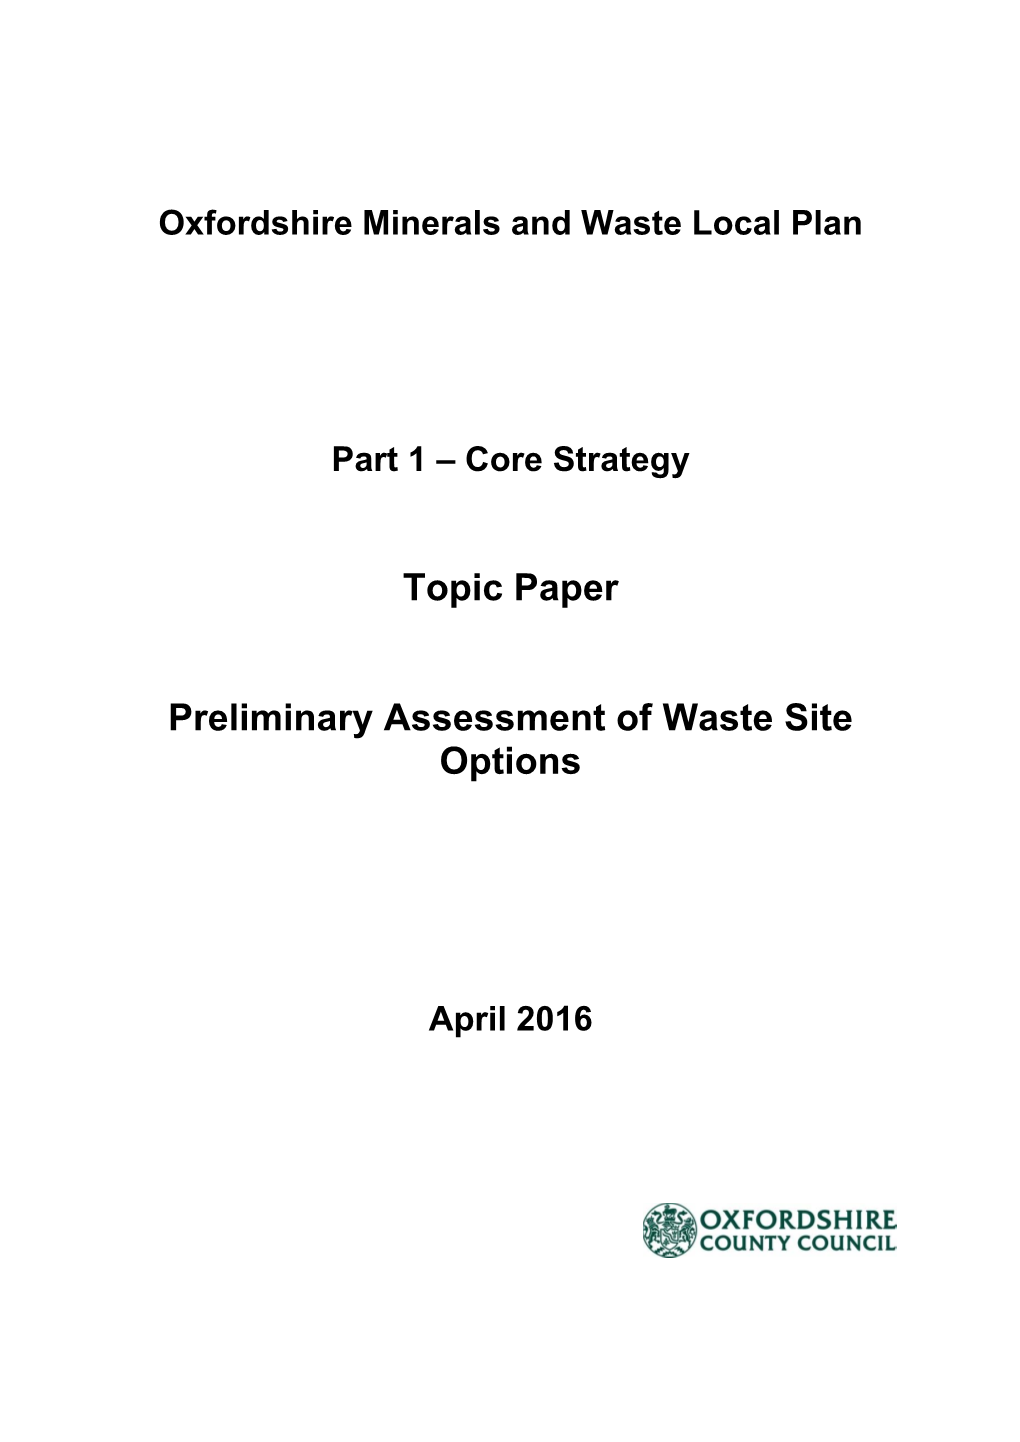 Topic Paper Preliminary Assessment of Waste Site Options